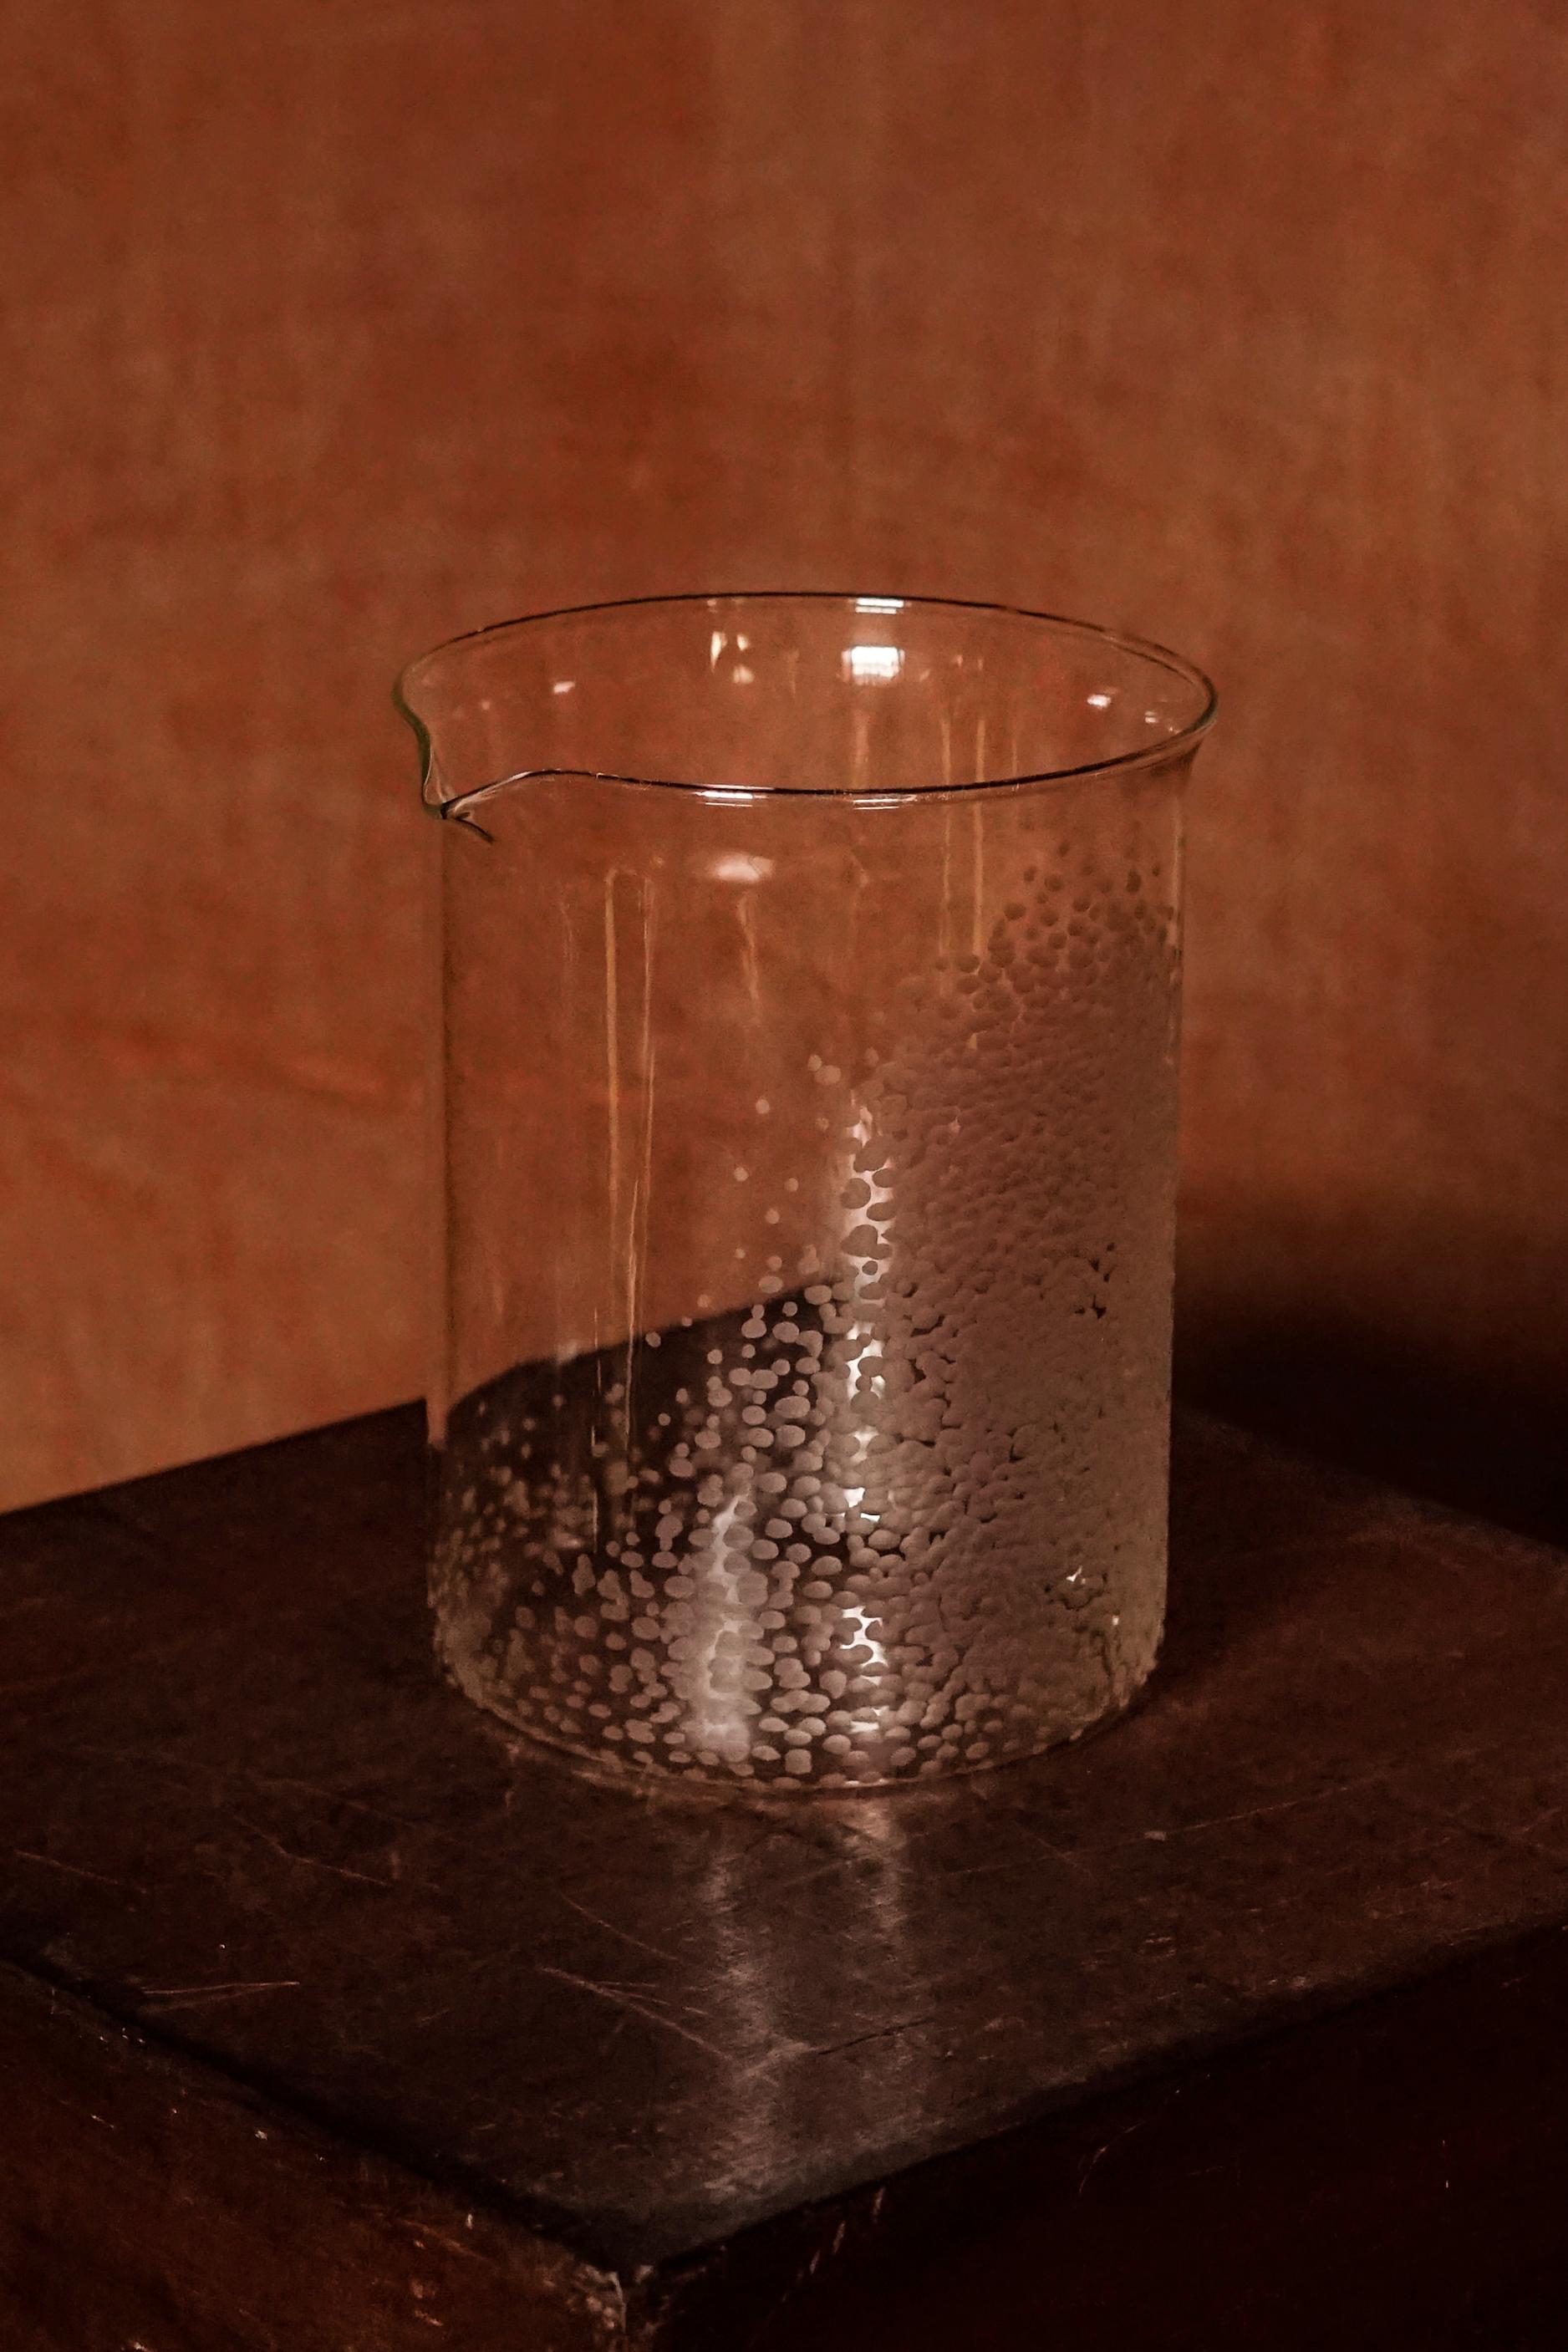  The Large Beaker, part of Second Lives by Juli Bolaños-Durman. Placed on top of a wooden surface.